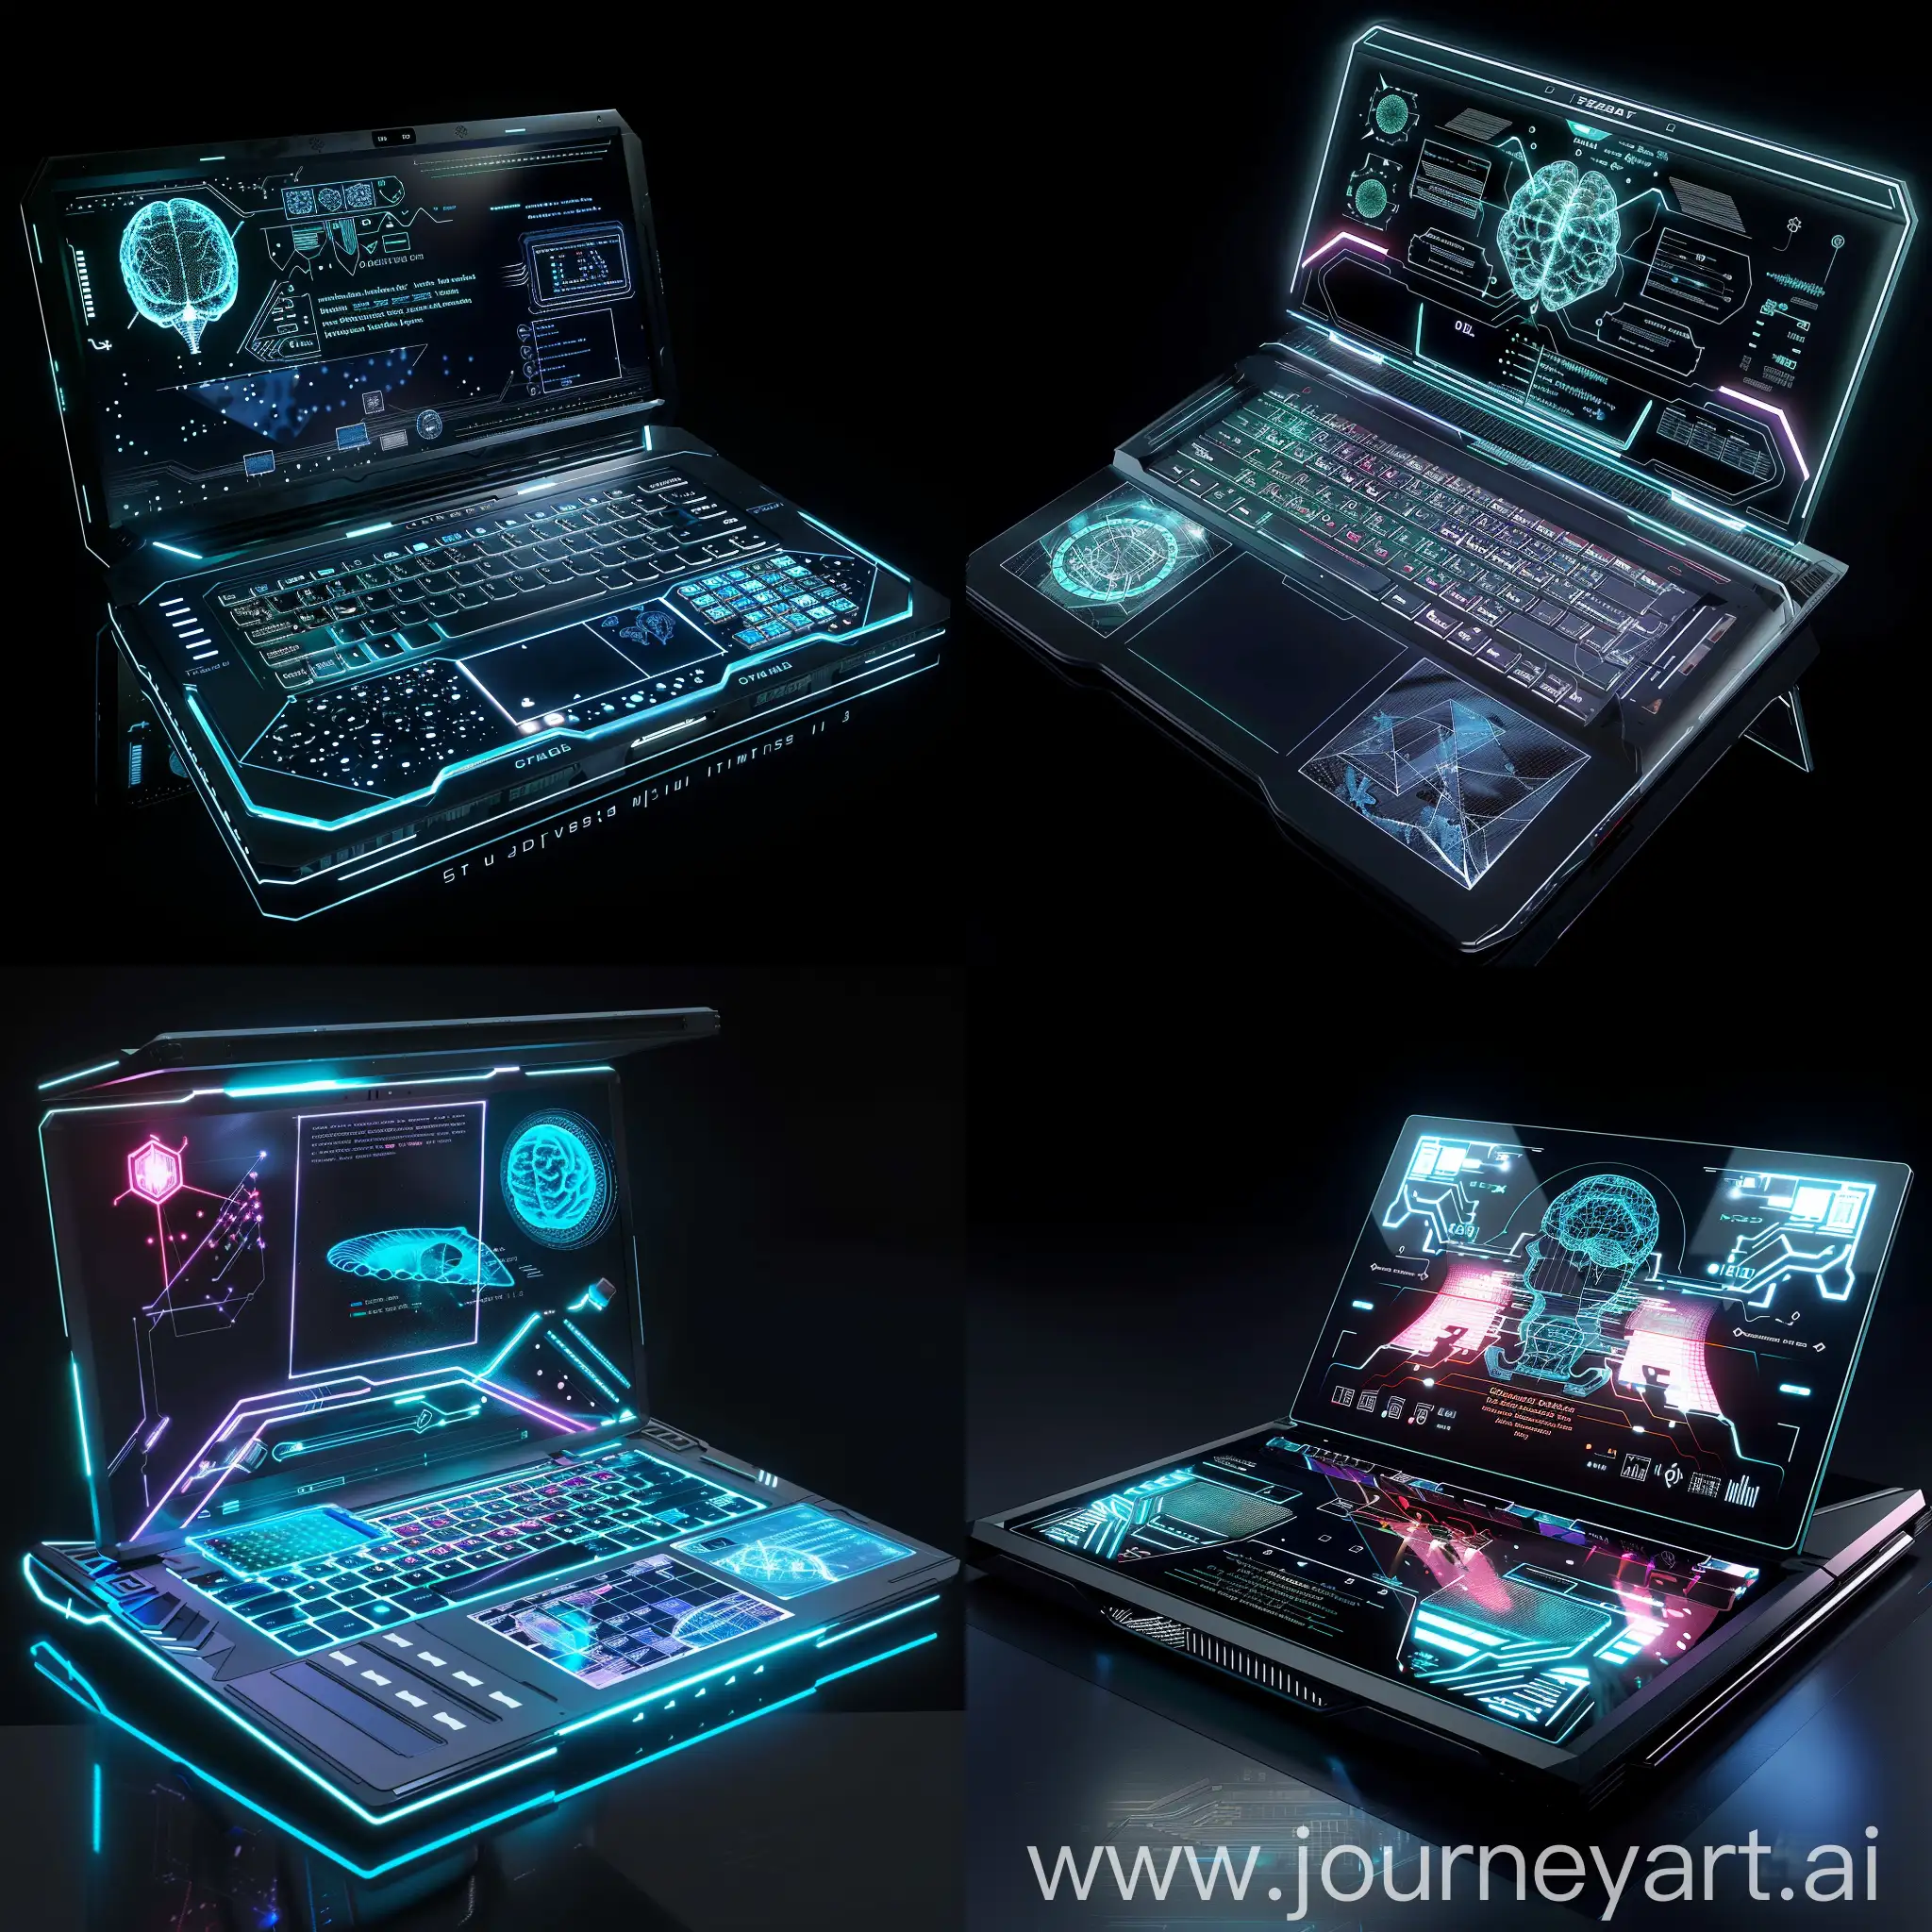 Futuristic-Laptop-with-GrapheneBased-Processors-and-Holographic-Display